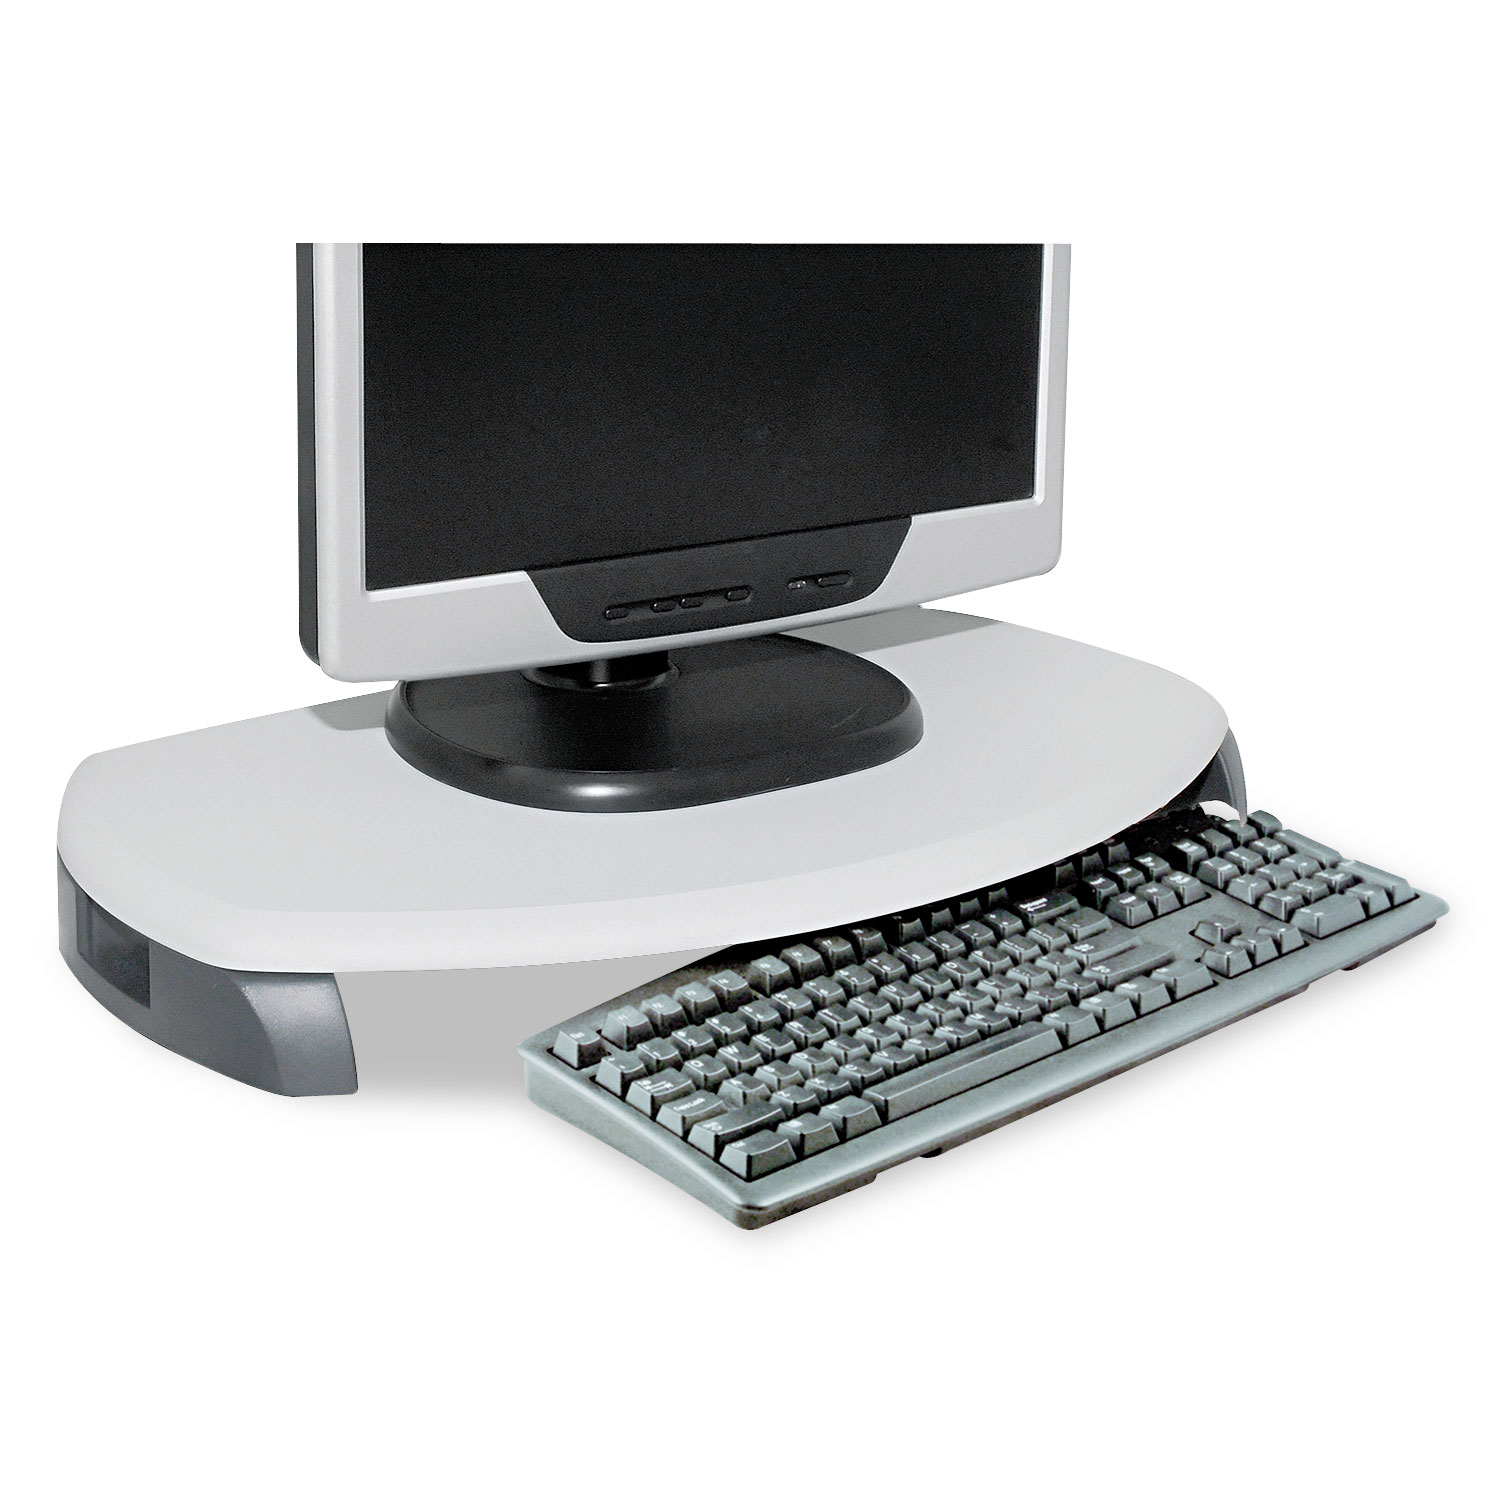 CRT/LCD Stand with Keyboard Storage, 23 x 13 1/4 x 3, Gray